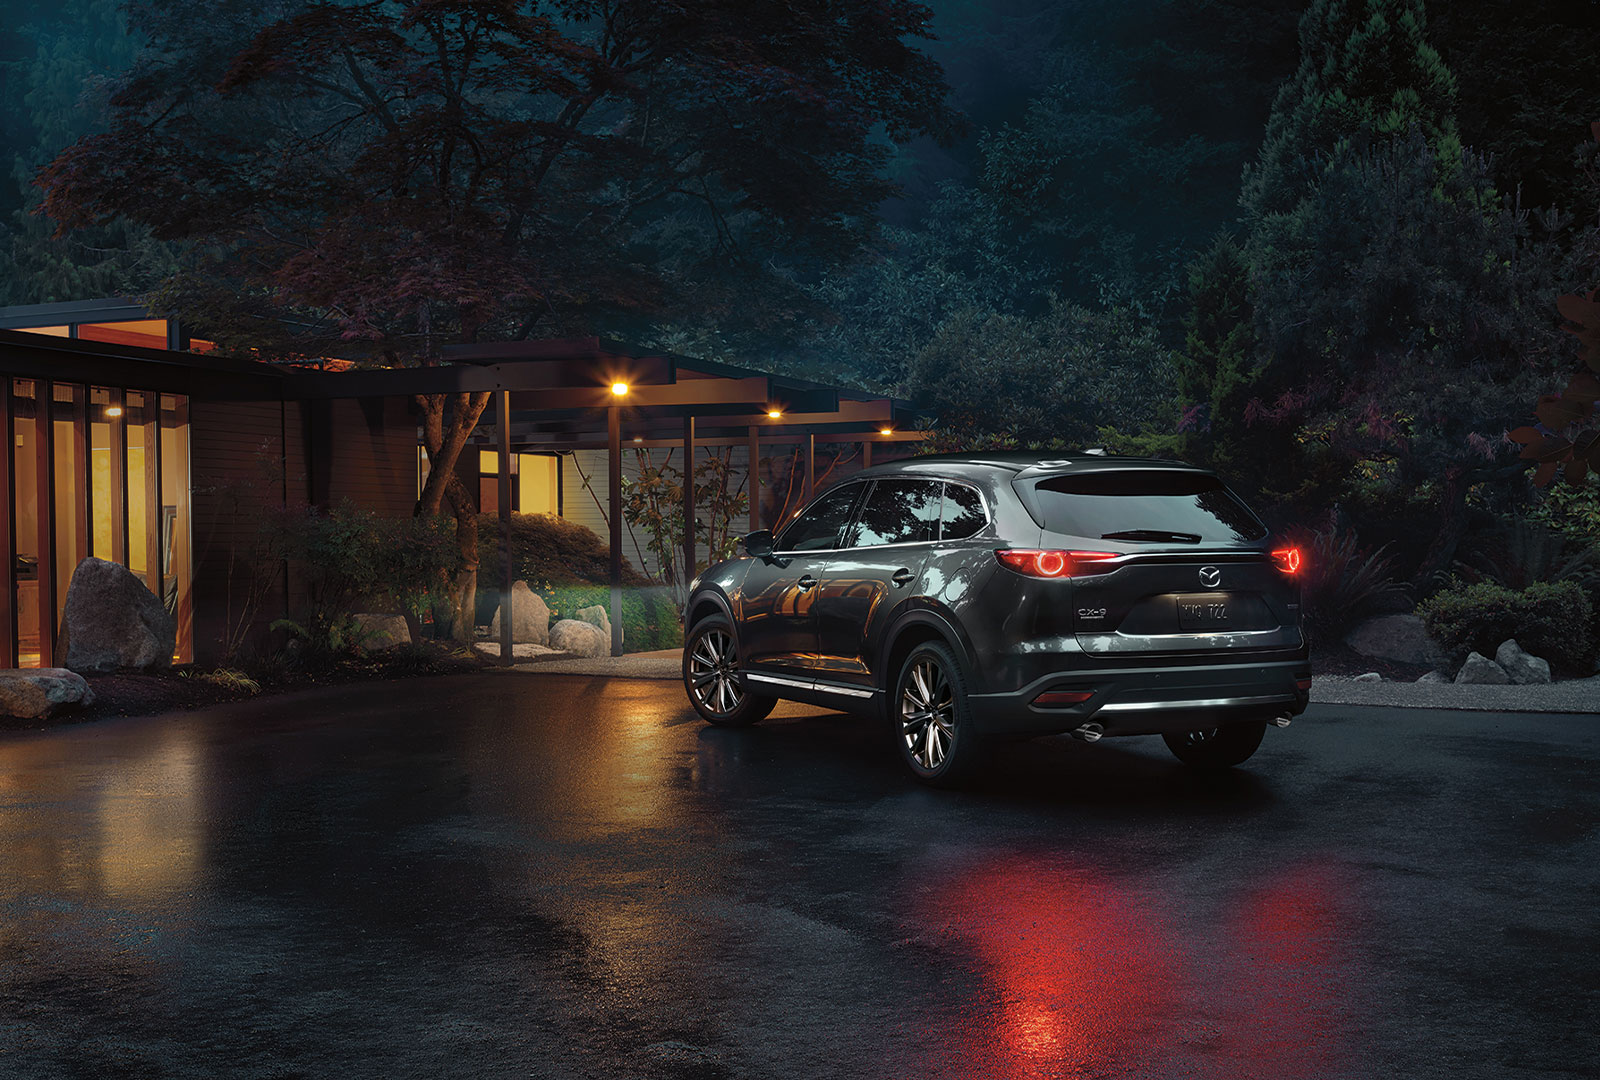 Mazda CX-9 parked in front of a cabin at night.